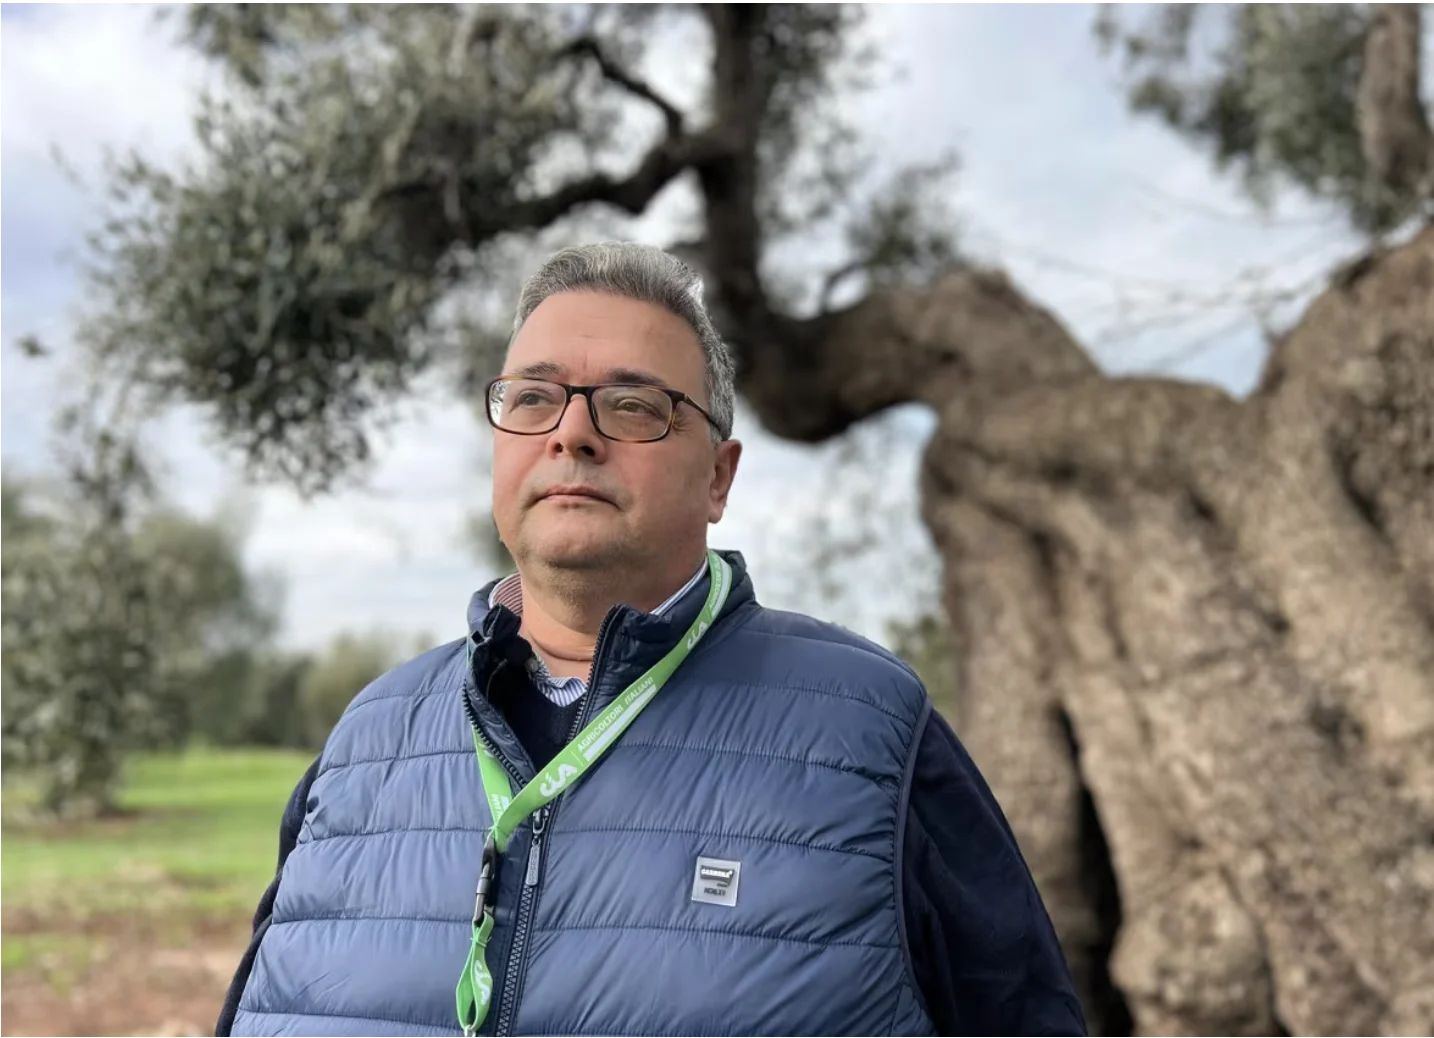 CBC: Puglia's failure to act 10 years ago has reduced the region's olive oil production by as much as 50 per cent, says Giannicola D’Amico, the regional vice-president of the country’s farming association, CIA-Agricoltori Italiani. (Megan Williams/CBC)